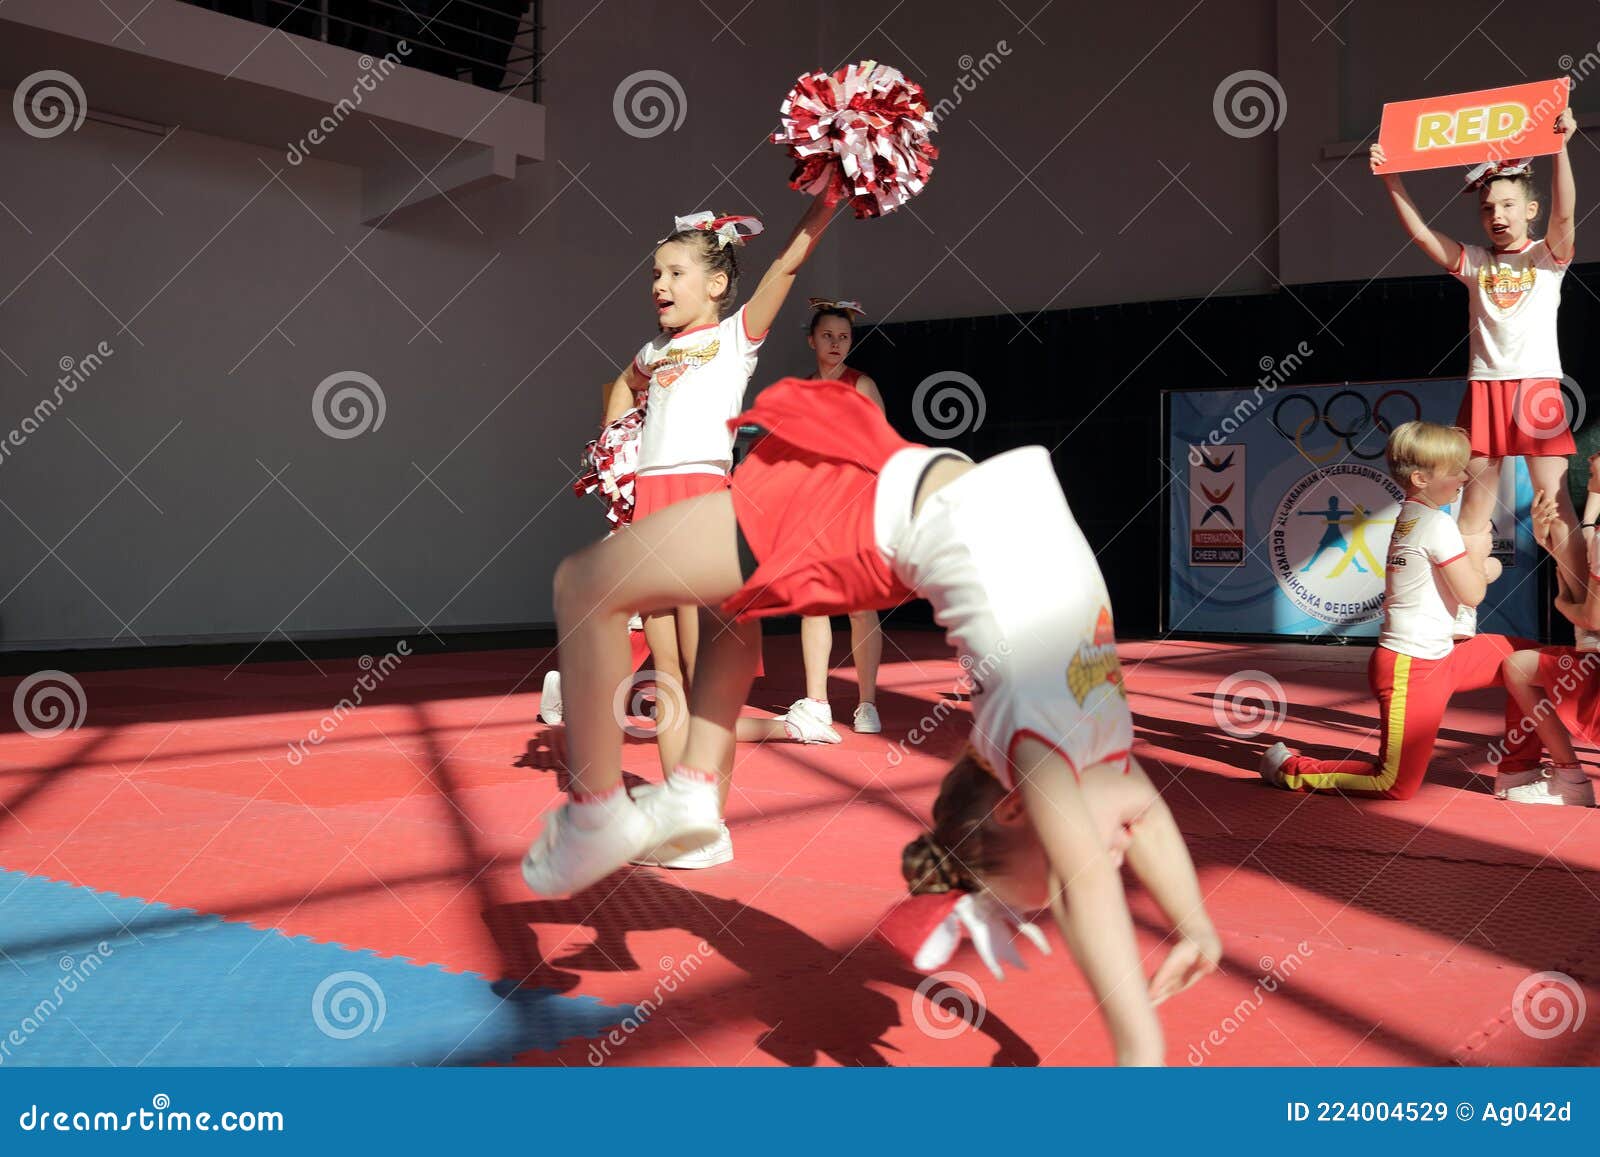 Young Cheerleaders Perform At The City Cheerleading Championship Editorial Stock Image Image 